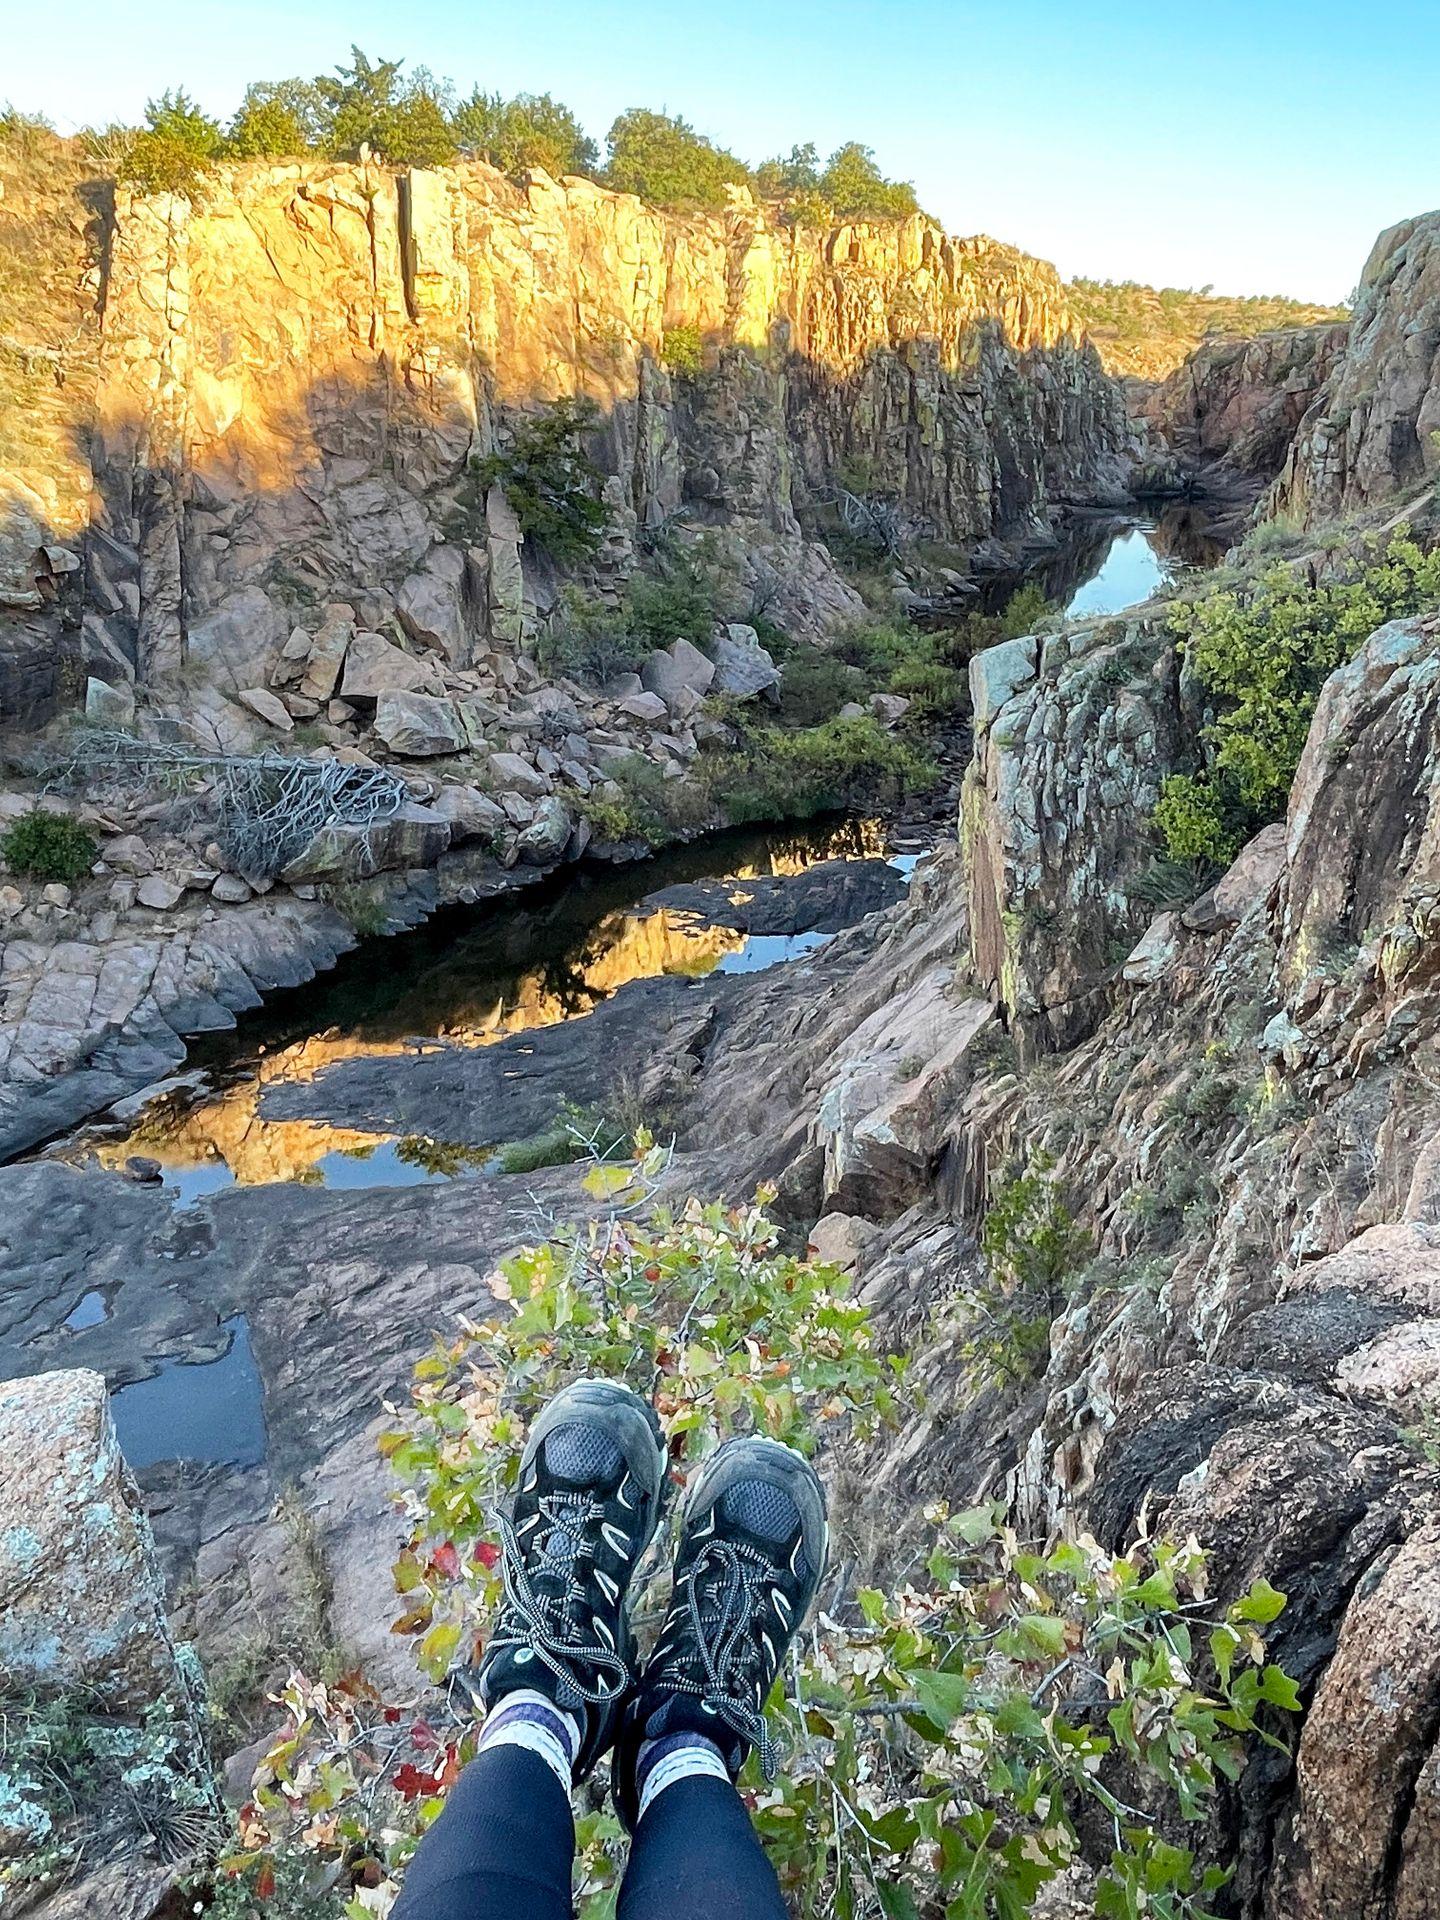 A photo of Lydia's feet wearing Merrell hiking shoes. In the background is a small canyon in Wichita Falls, Oklahoma.